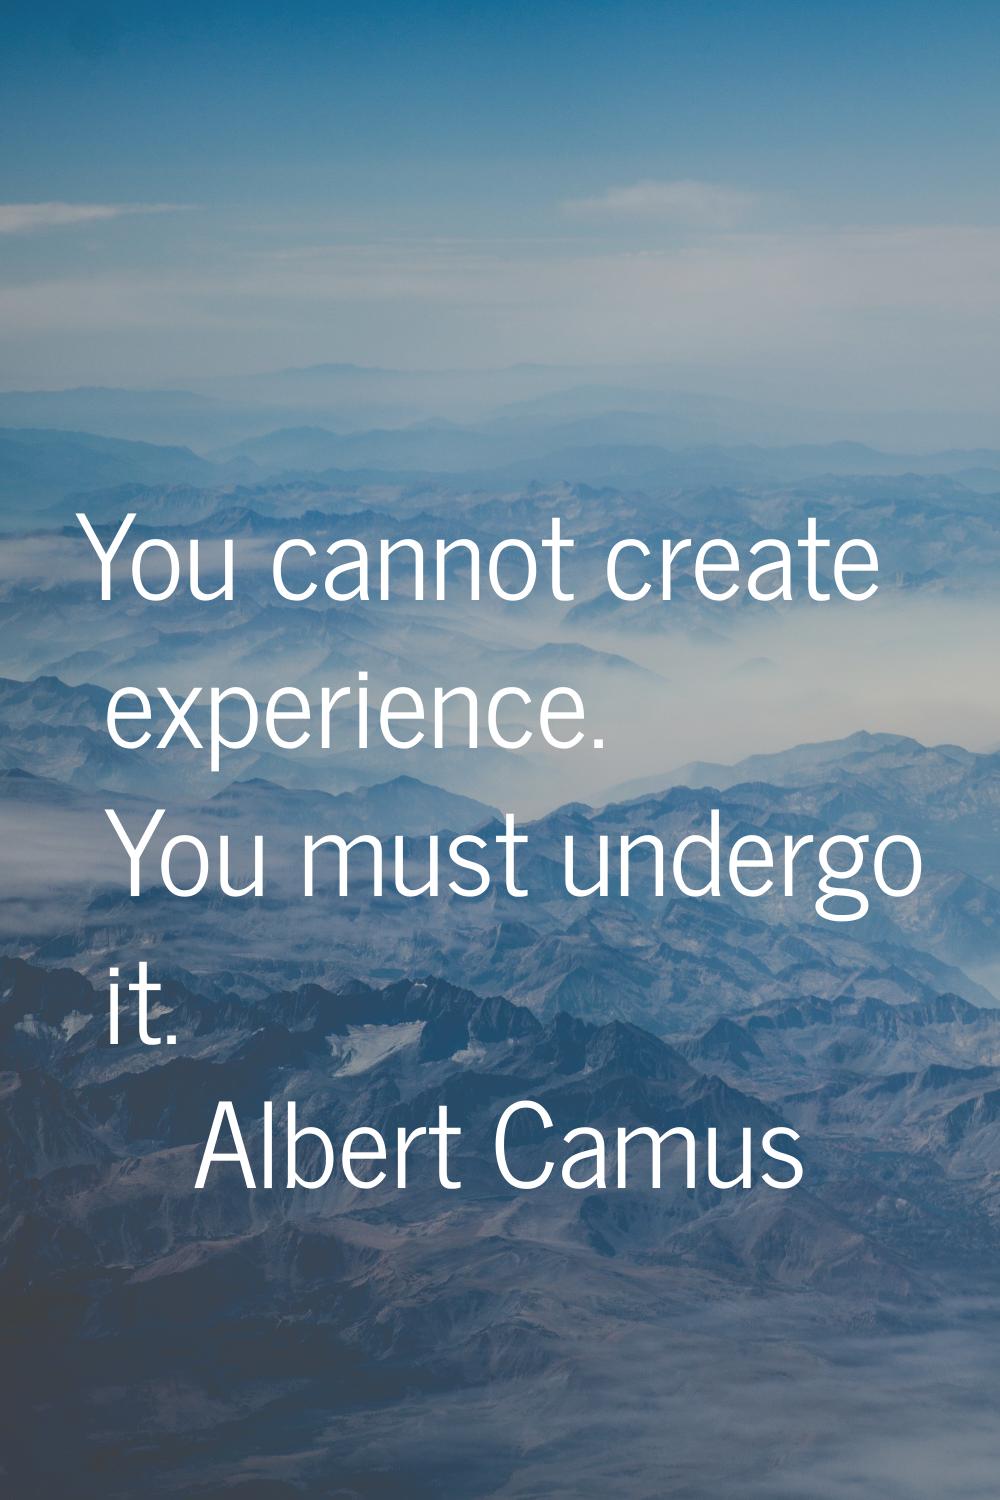 You cannot create experience. You must undergo it.